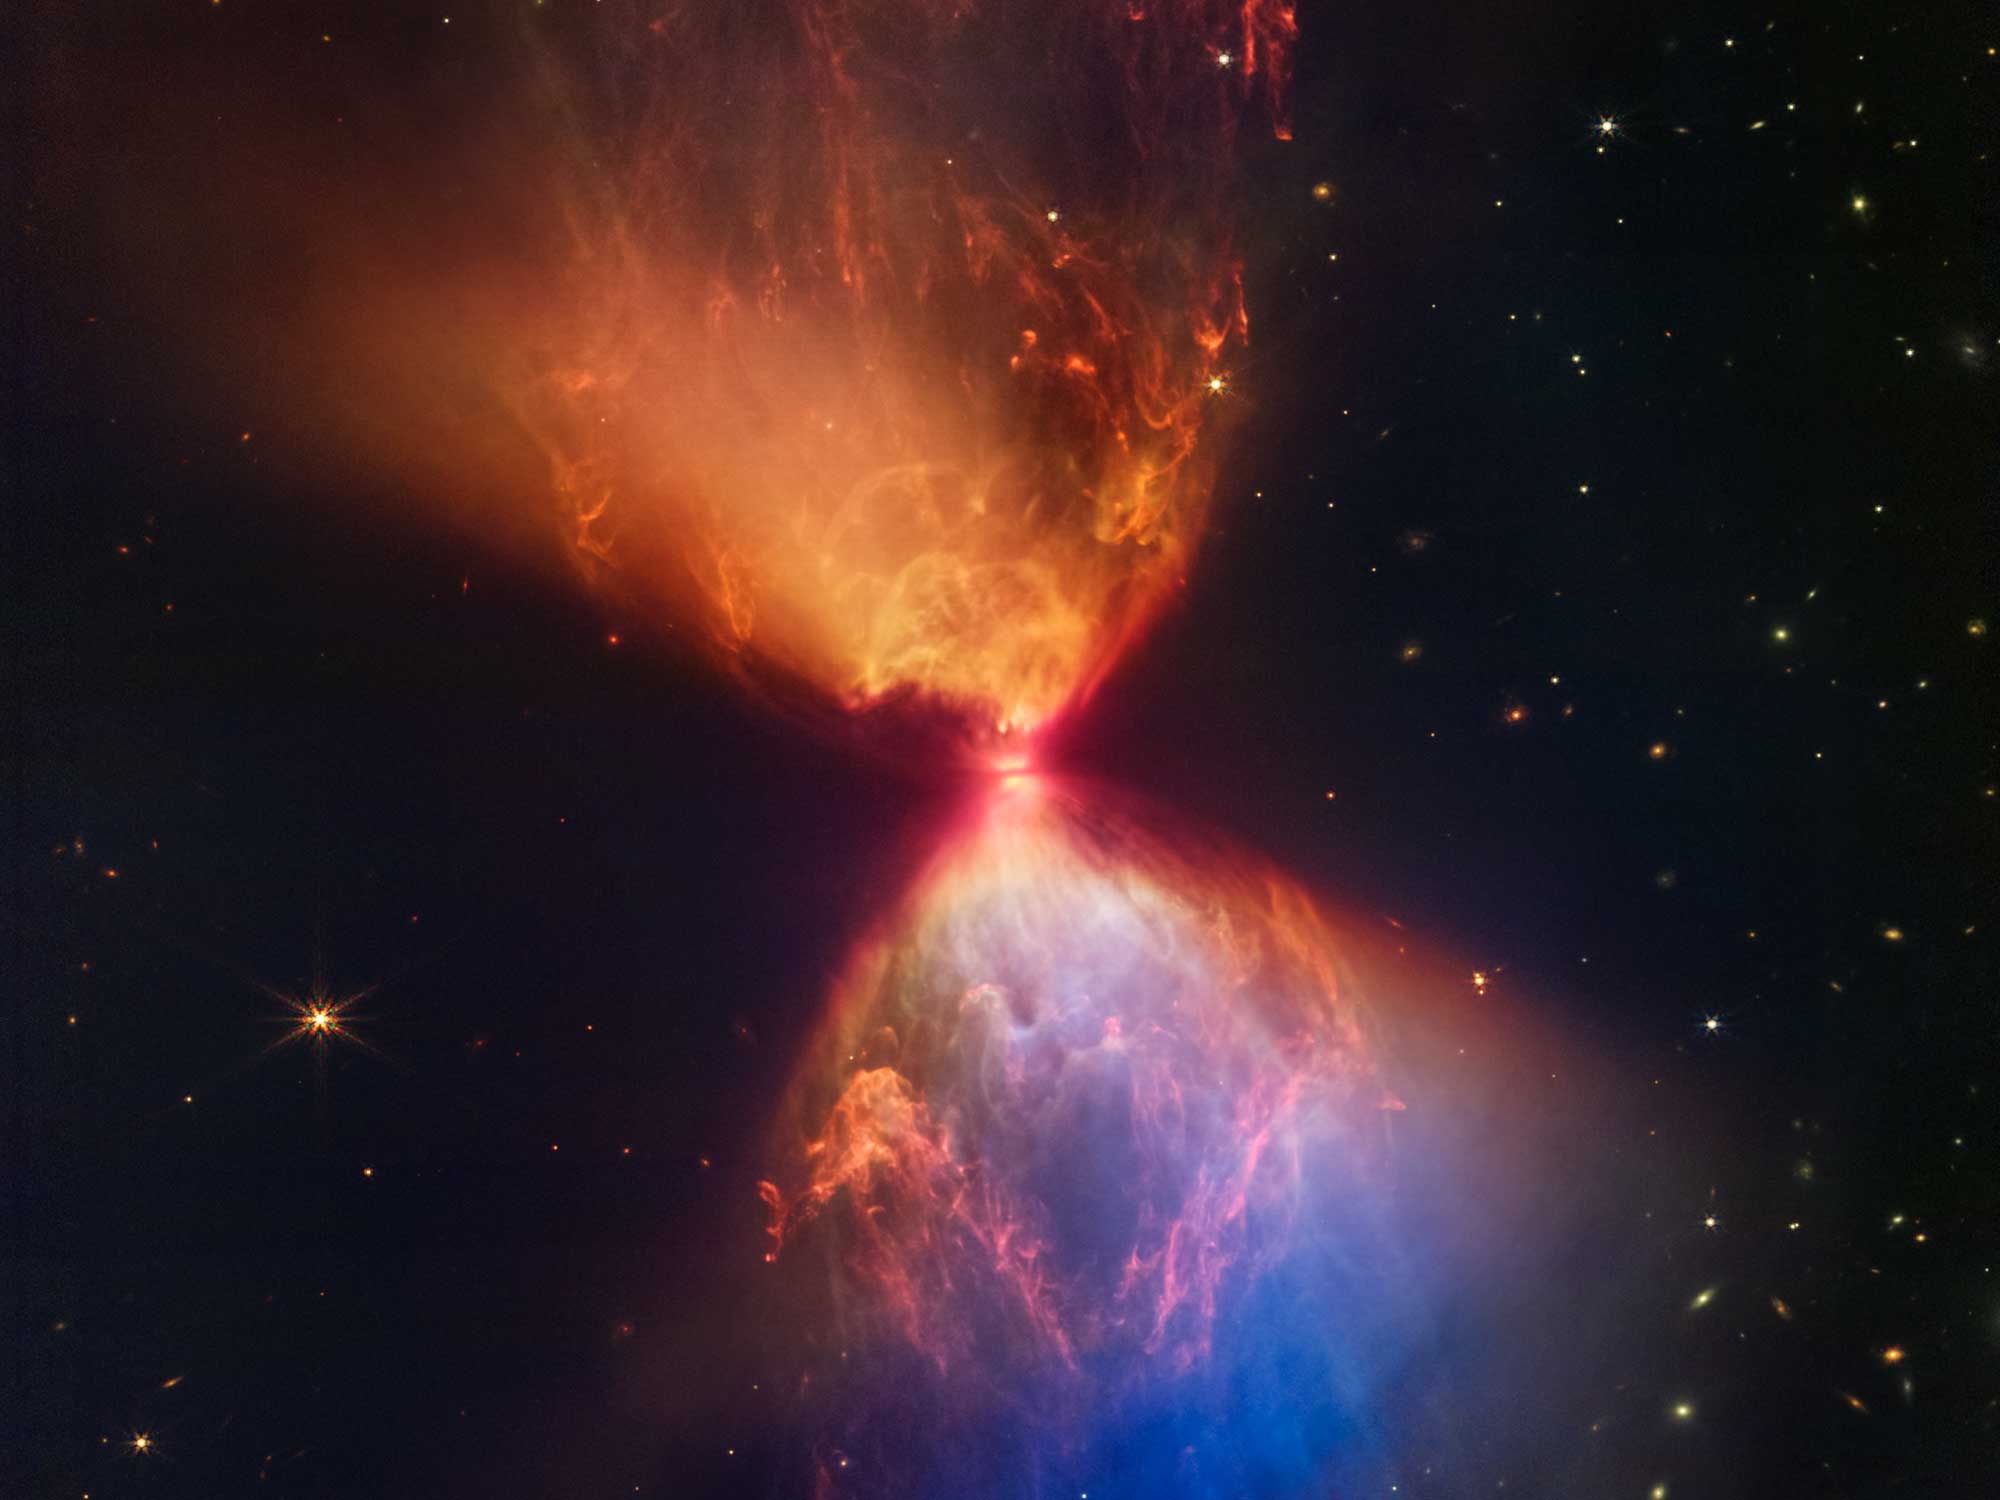 The protostar within the dark cloud L1527, shown in this image from NASA’s James Webb Space Telescope Near-Infrared Camera (NIRCam).